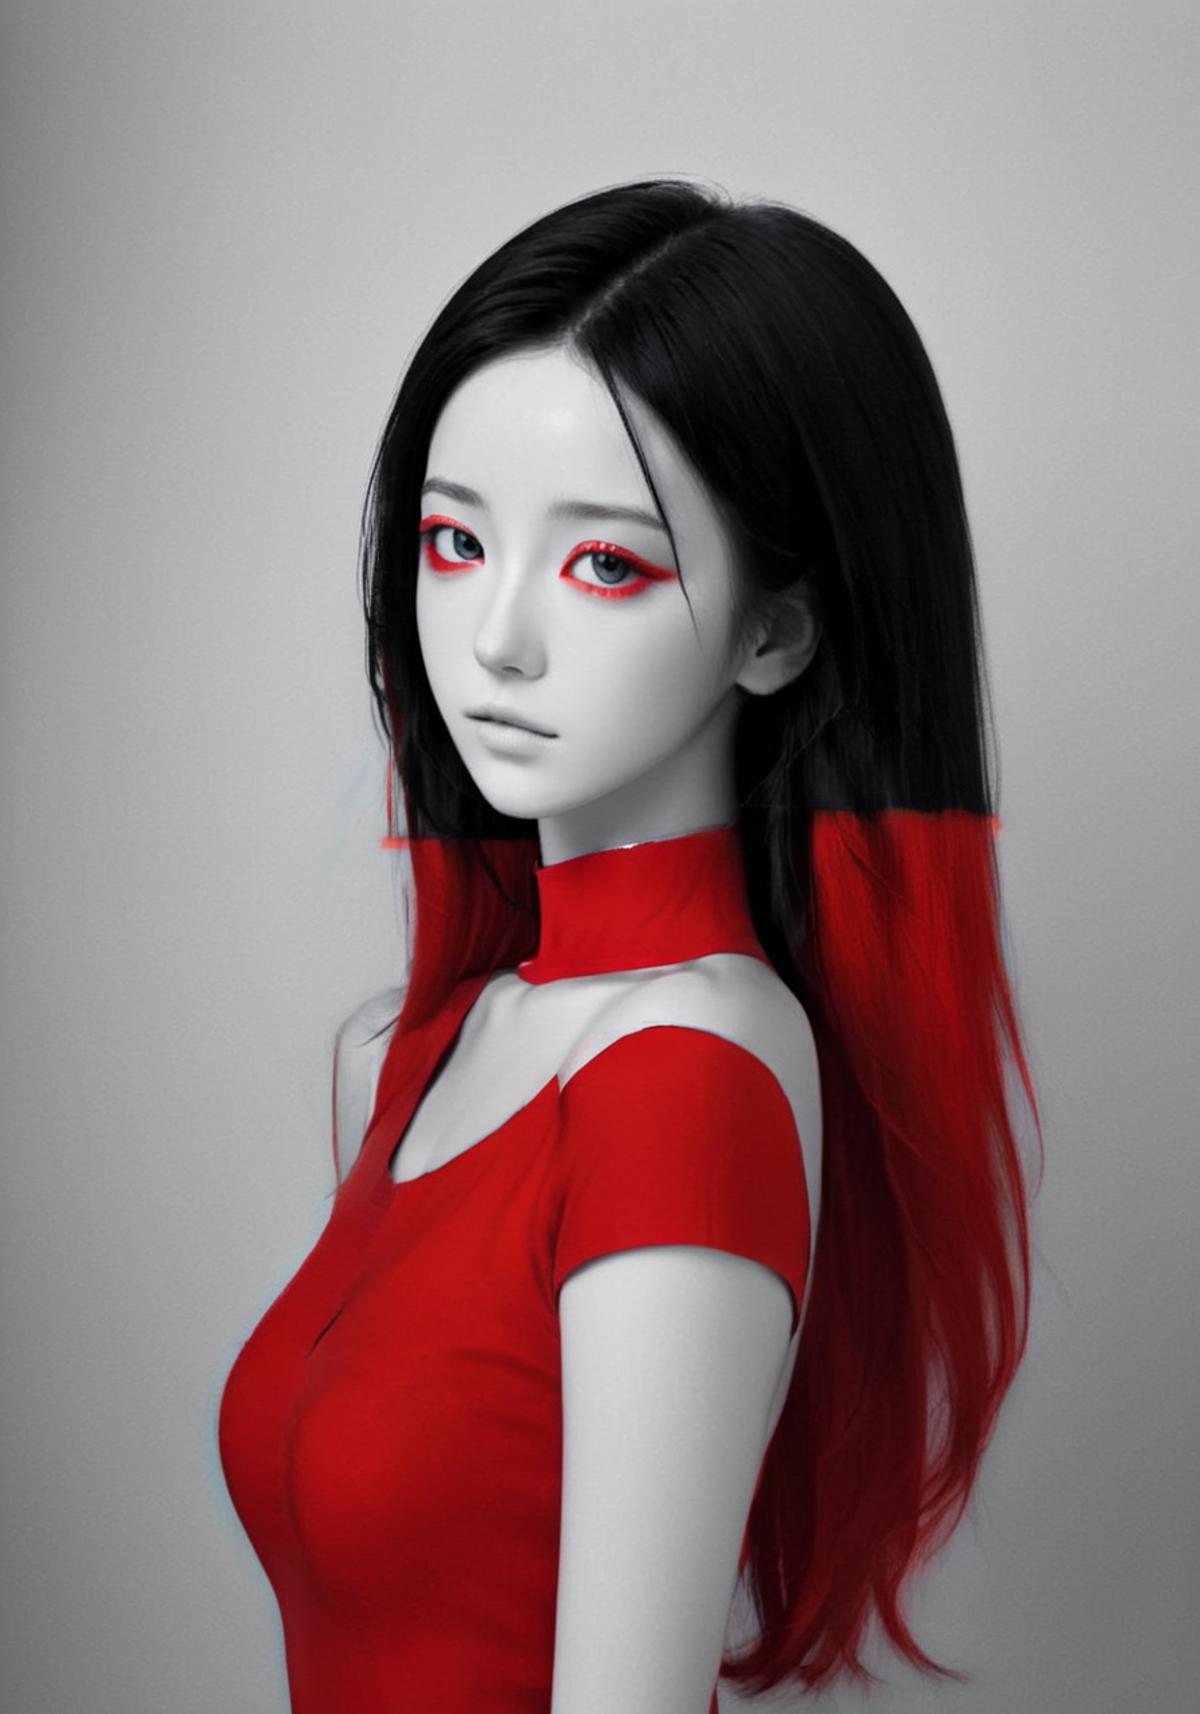 AI model image by Shan_bailing